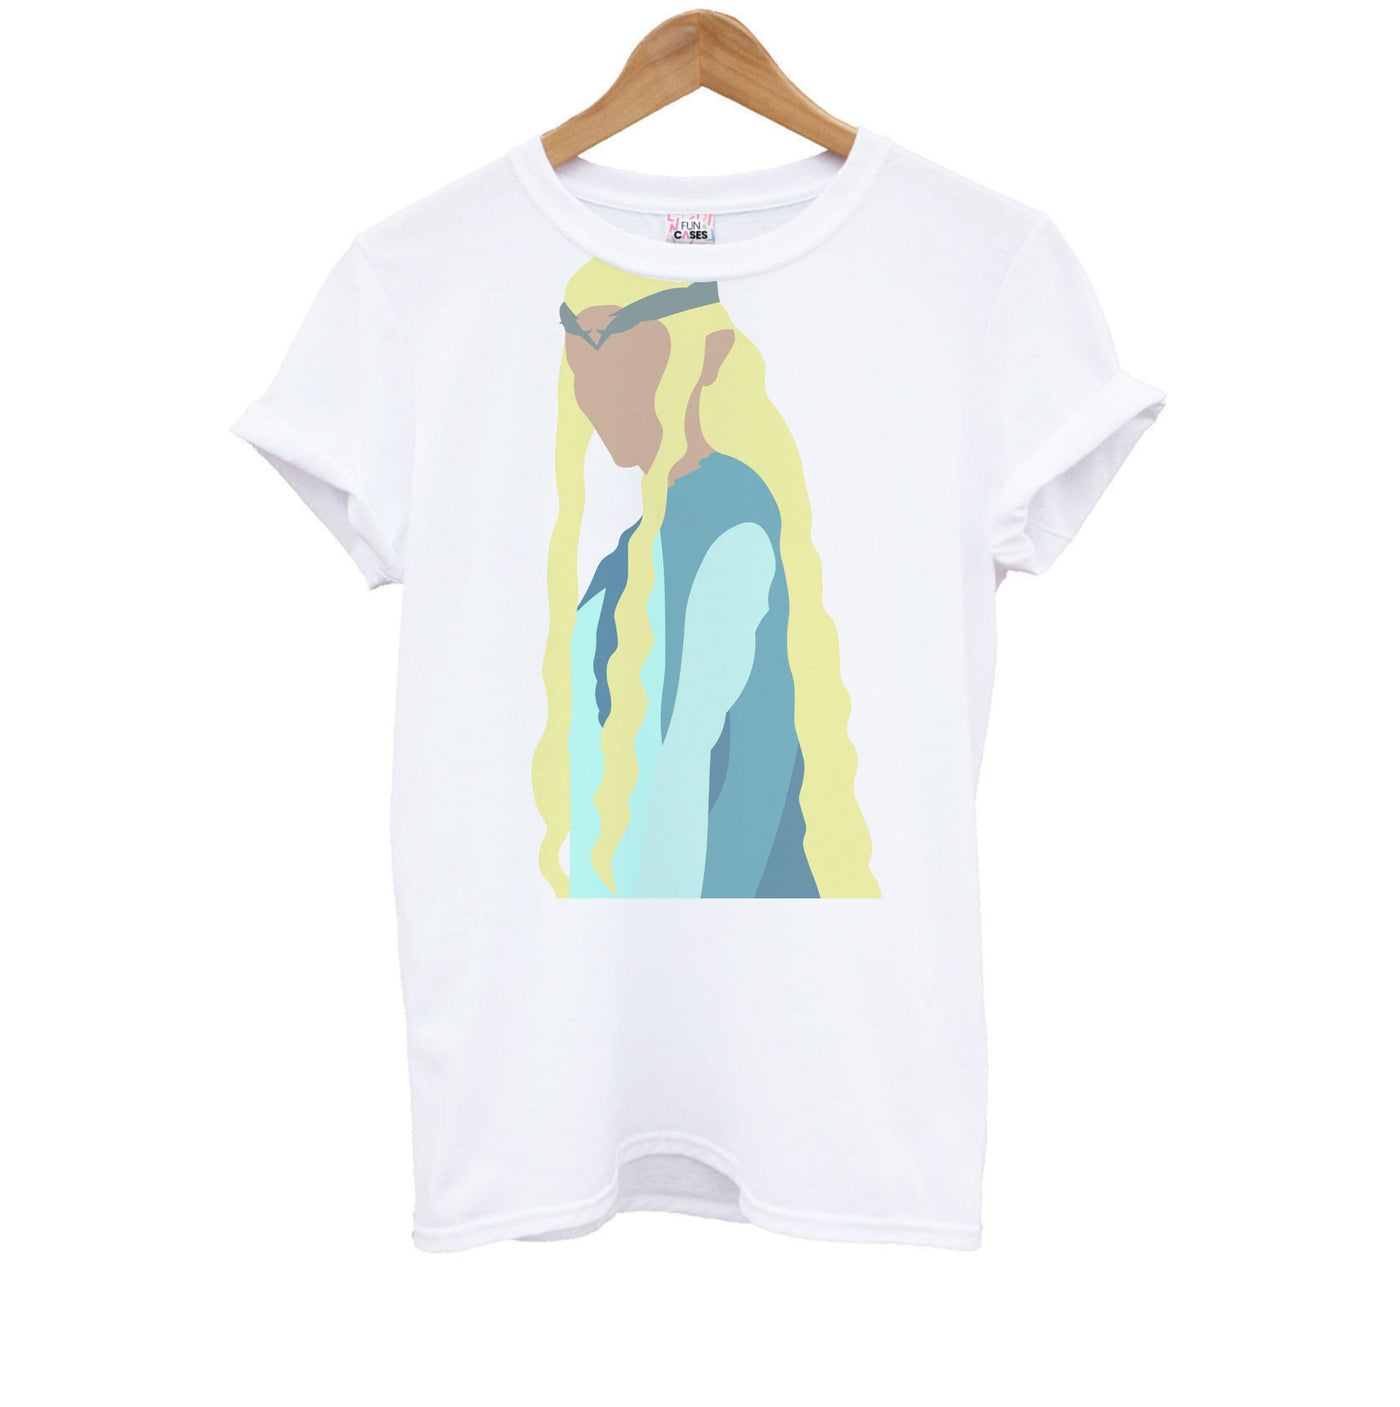 Galadriel - Lord Of The Rings Kids T-Shirt